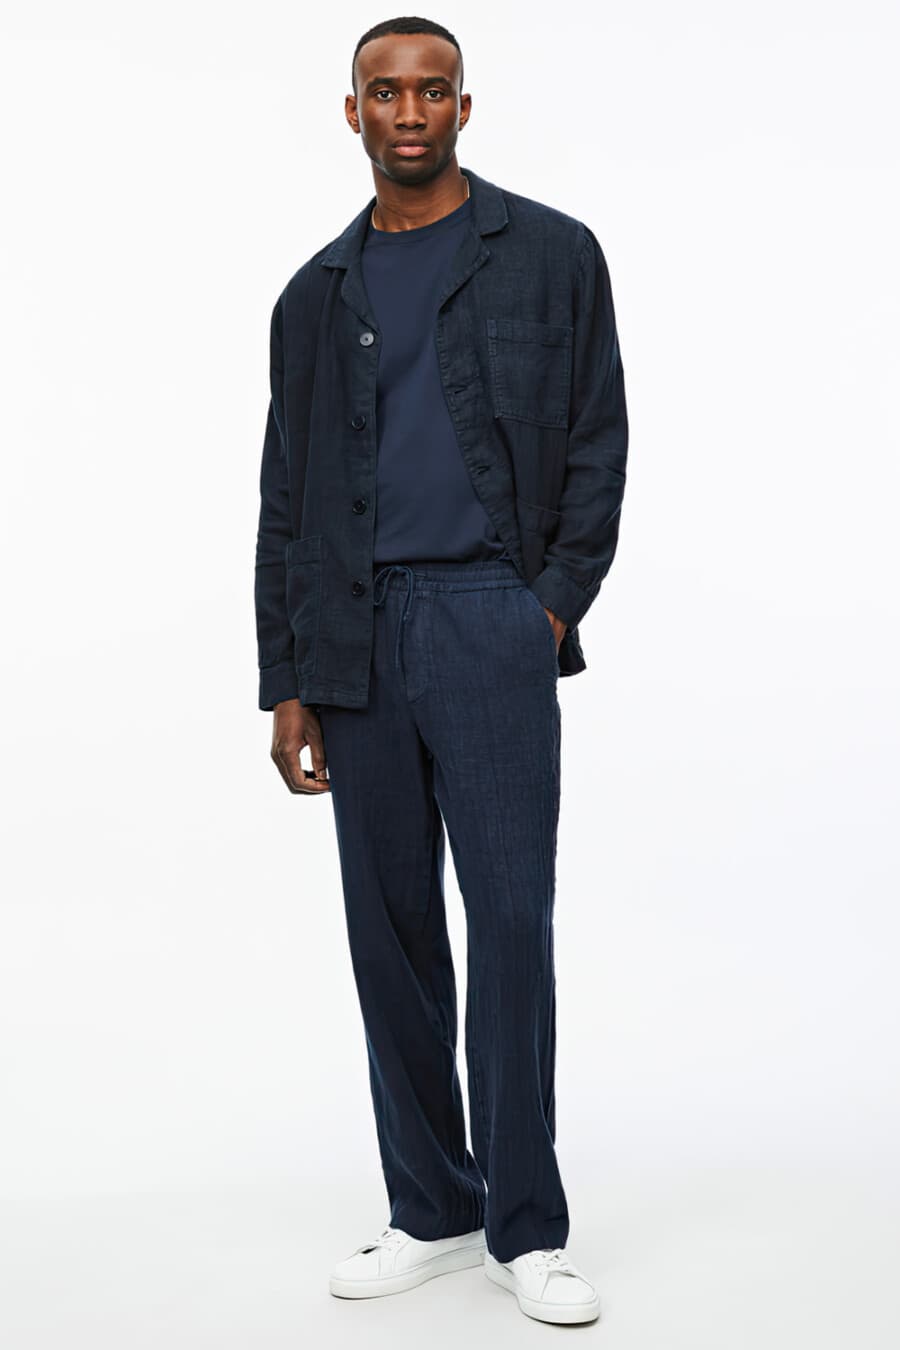 Men's navy linen overshirt, drawstring navy pants, tucked in blue T-shirt and white sneakers outfit